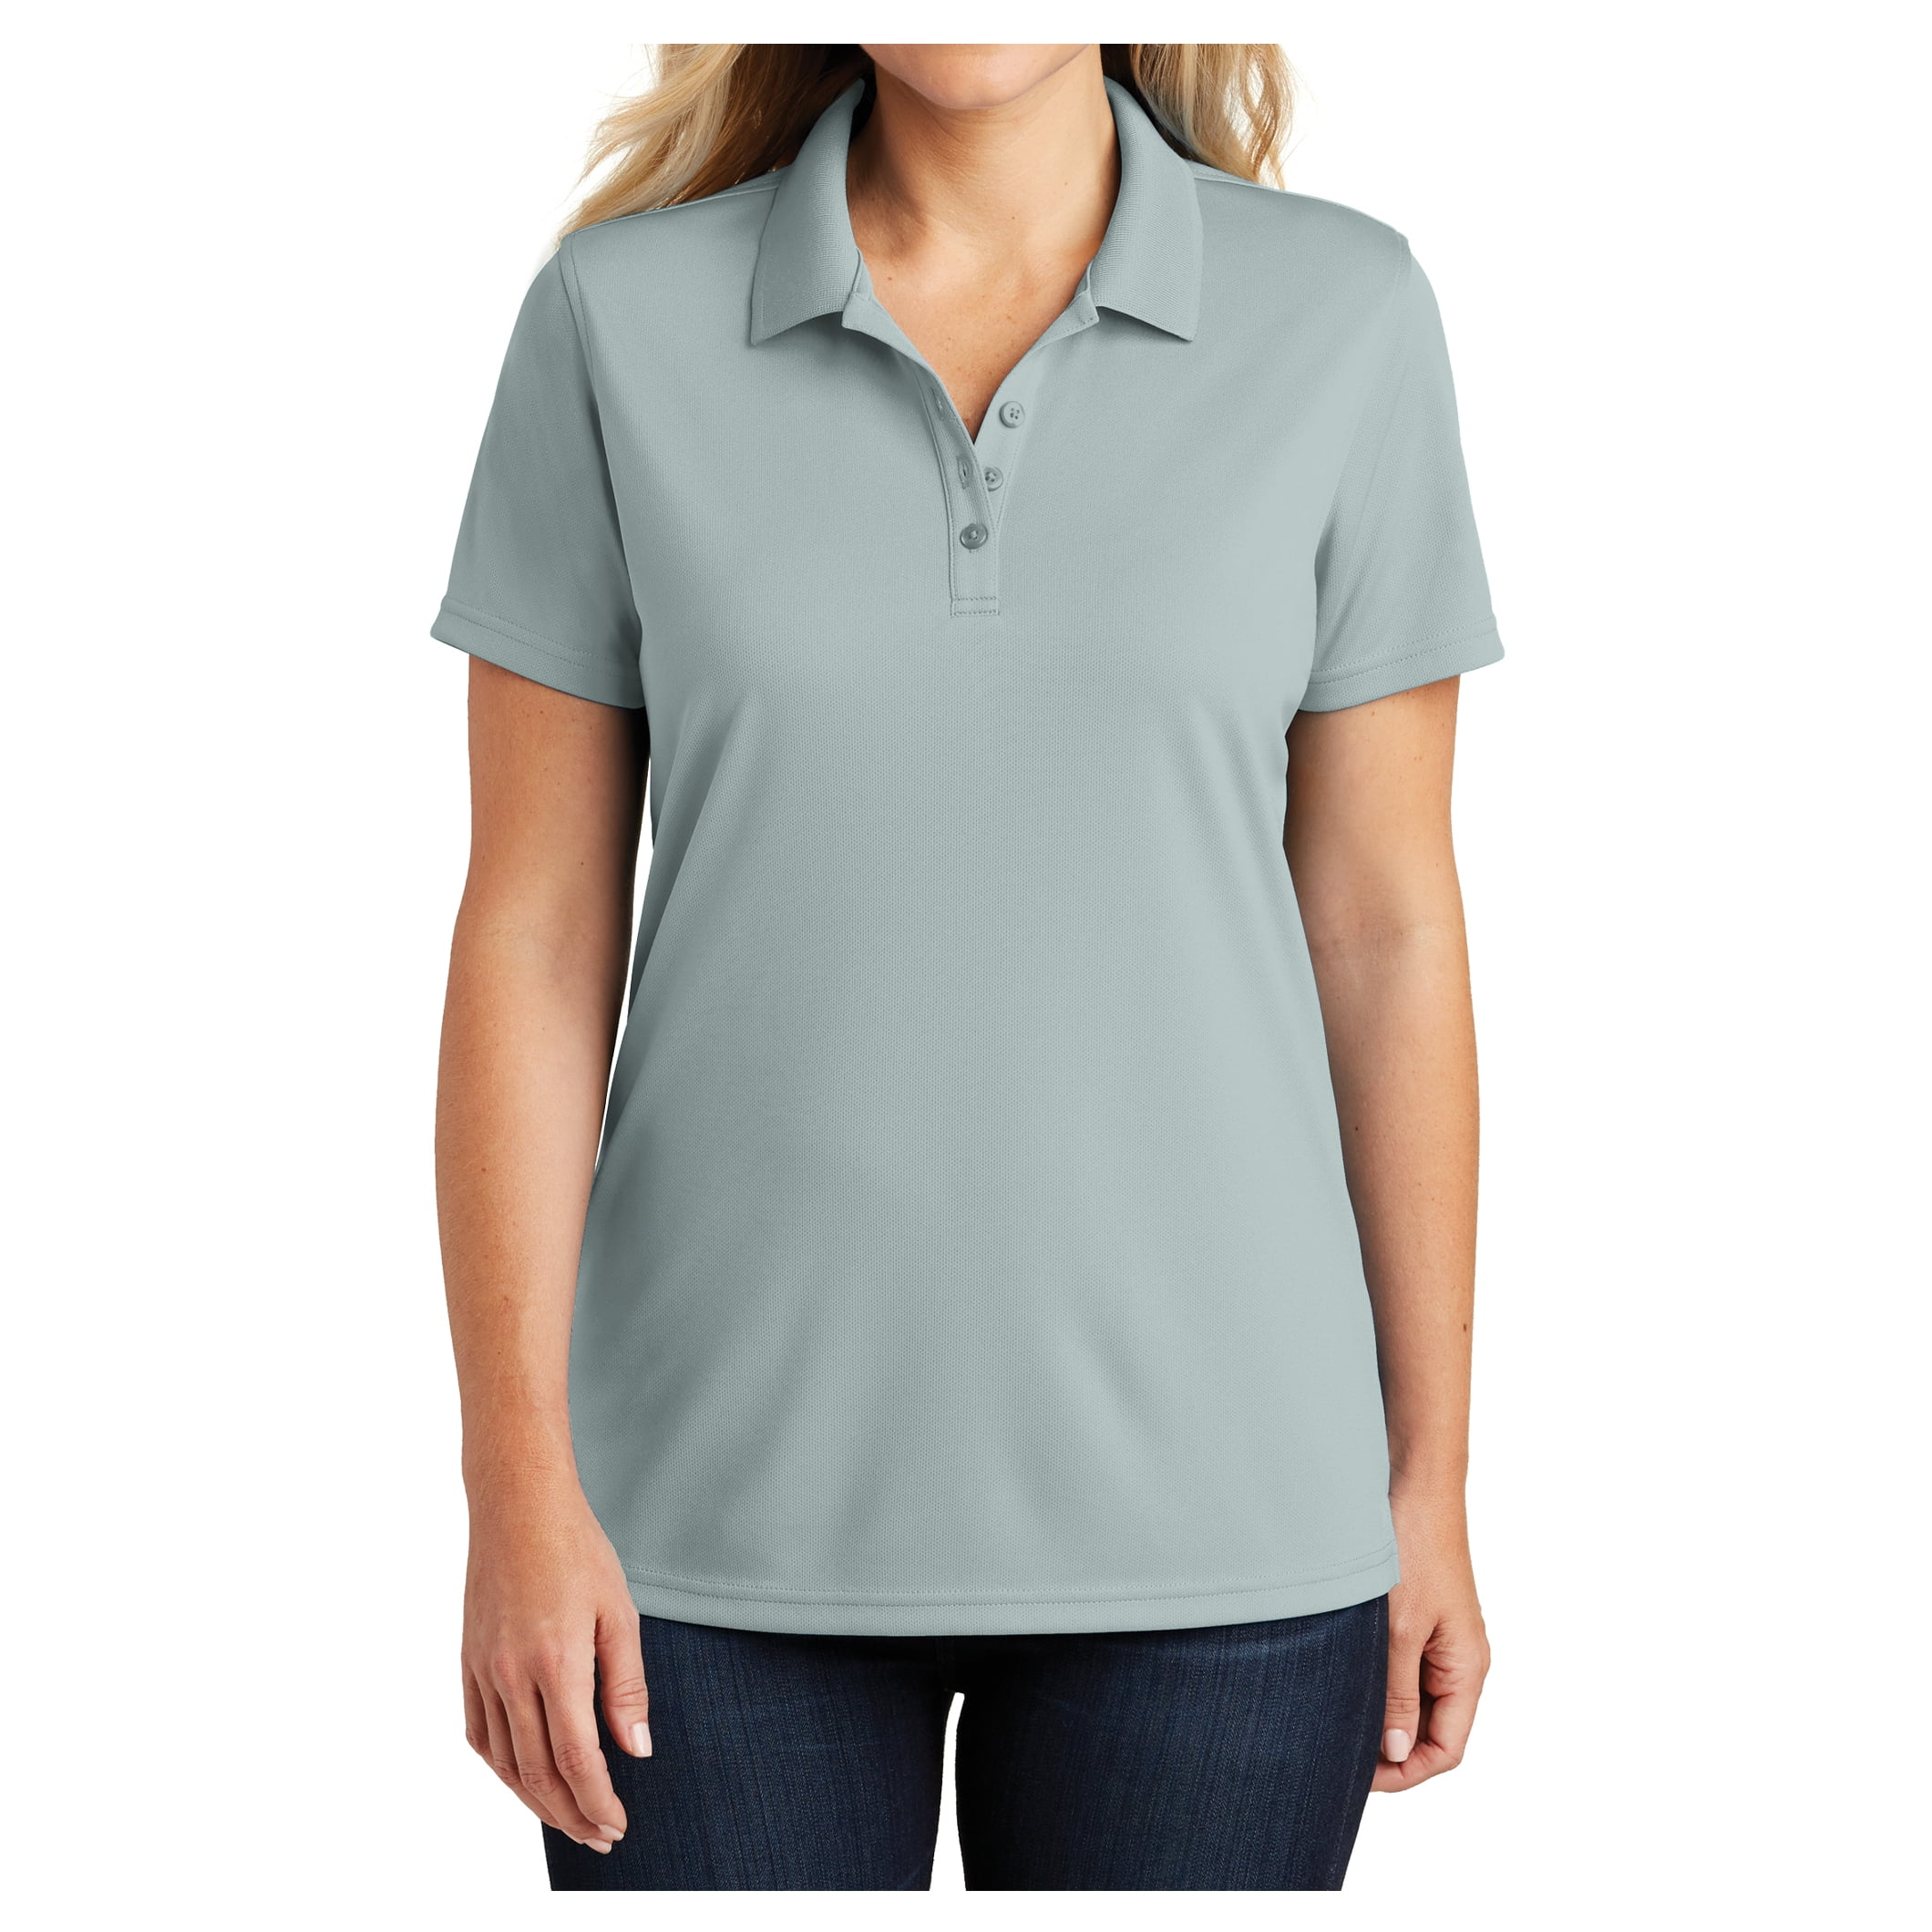 Womens Dry Zone UV Polyester Micro-Mesh Polo Gusty Grey 3X-Large